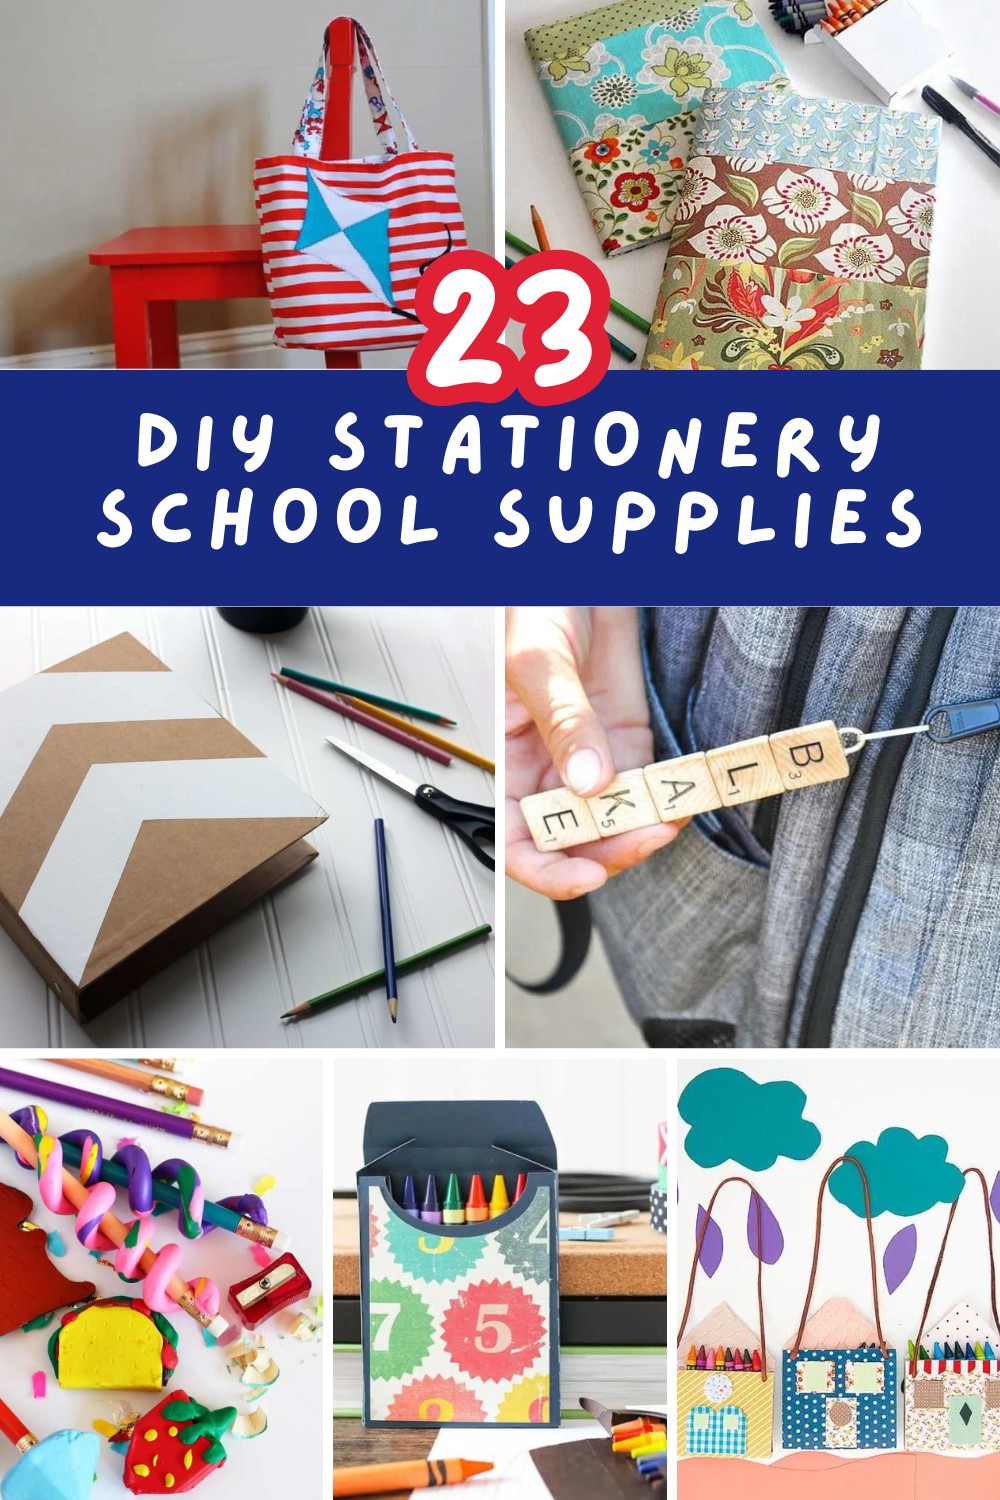 Searching for fun and creative DIY school supplies? You’re in luck! From personalized notebooks and funky pencils to homemade erasers, these ideas will make school time exciting for your kids. Get crafty and make back-to-school prep a blast! #DIYSupplies #BackToSchool #CraftyKids